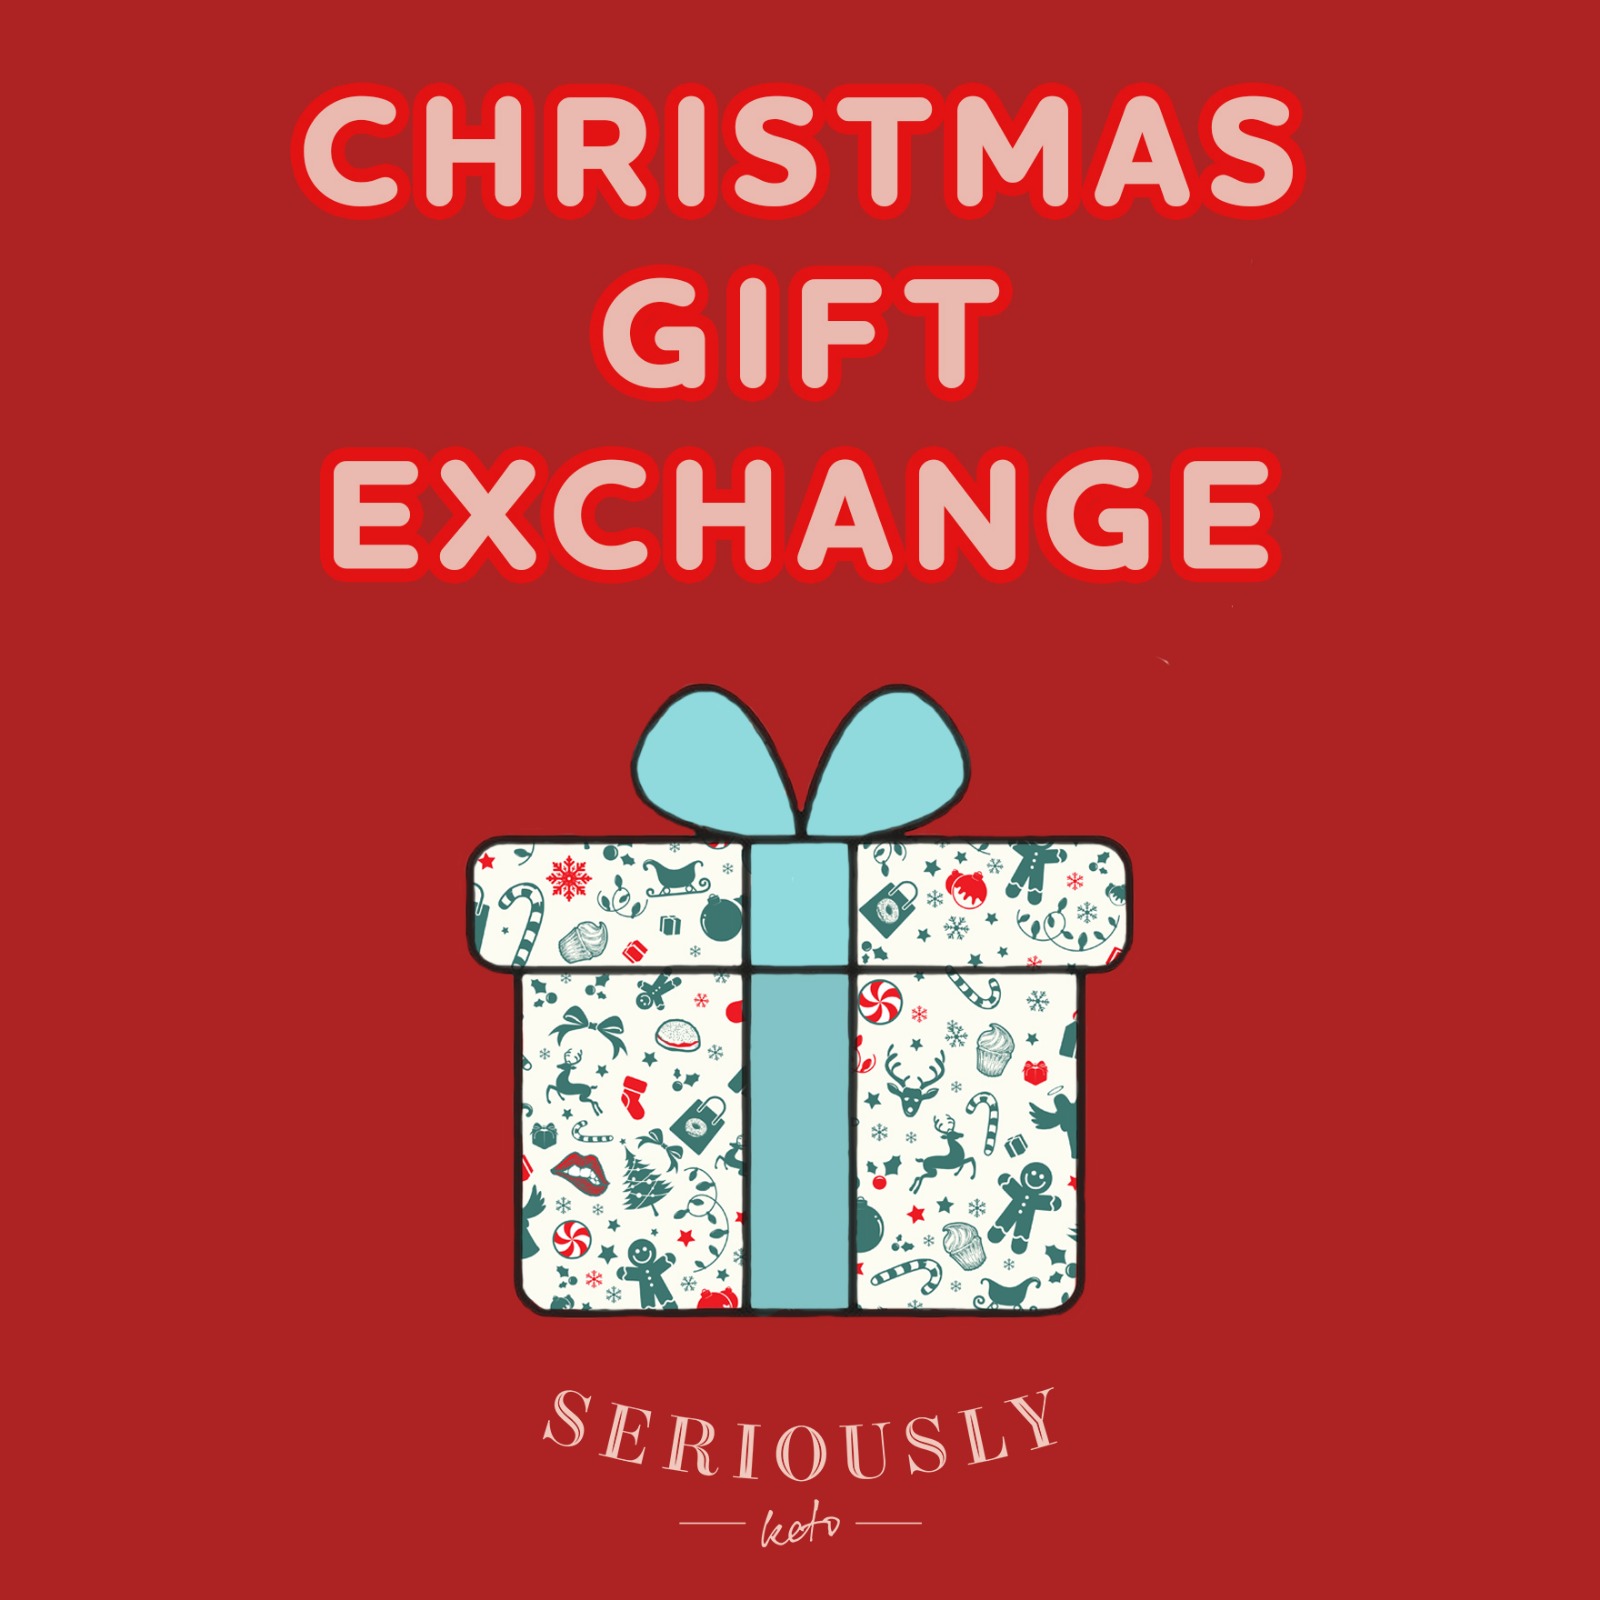 anyone interested in a holiday gift exchange